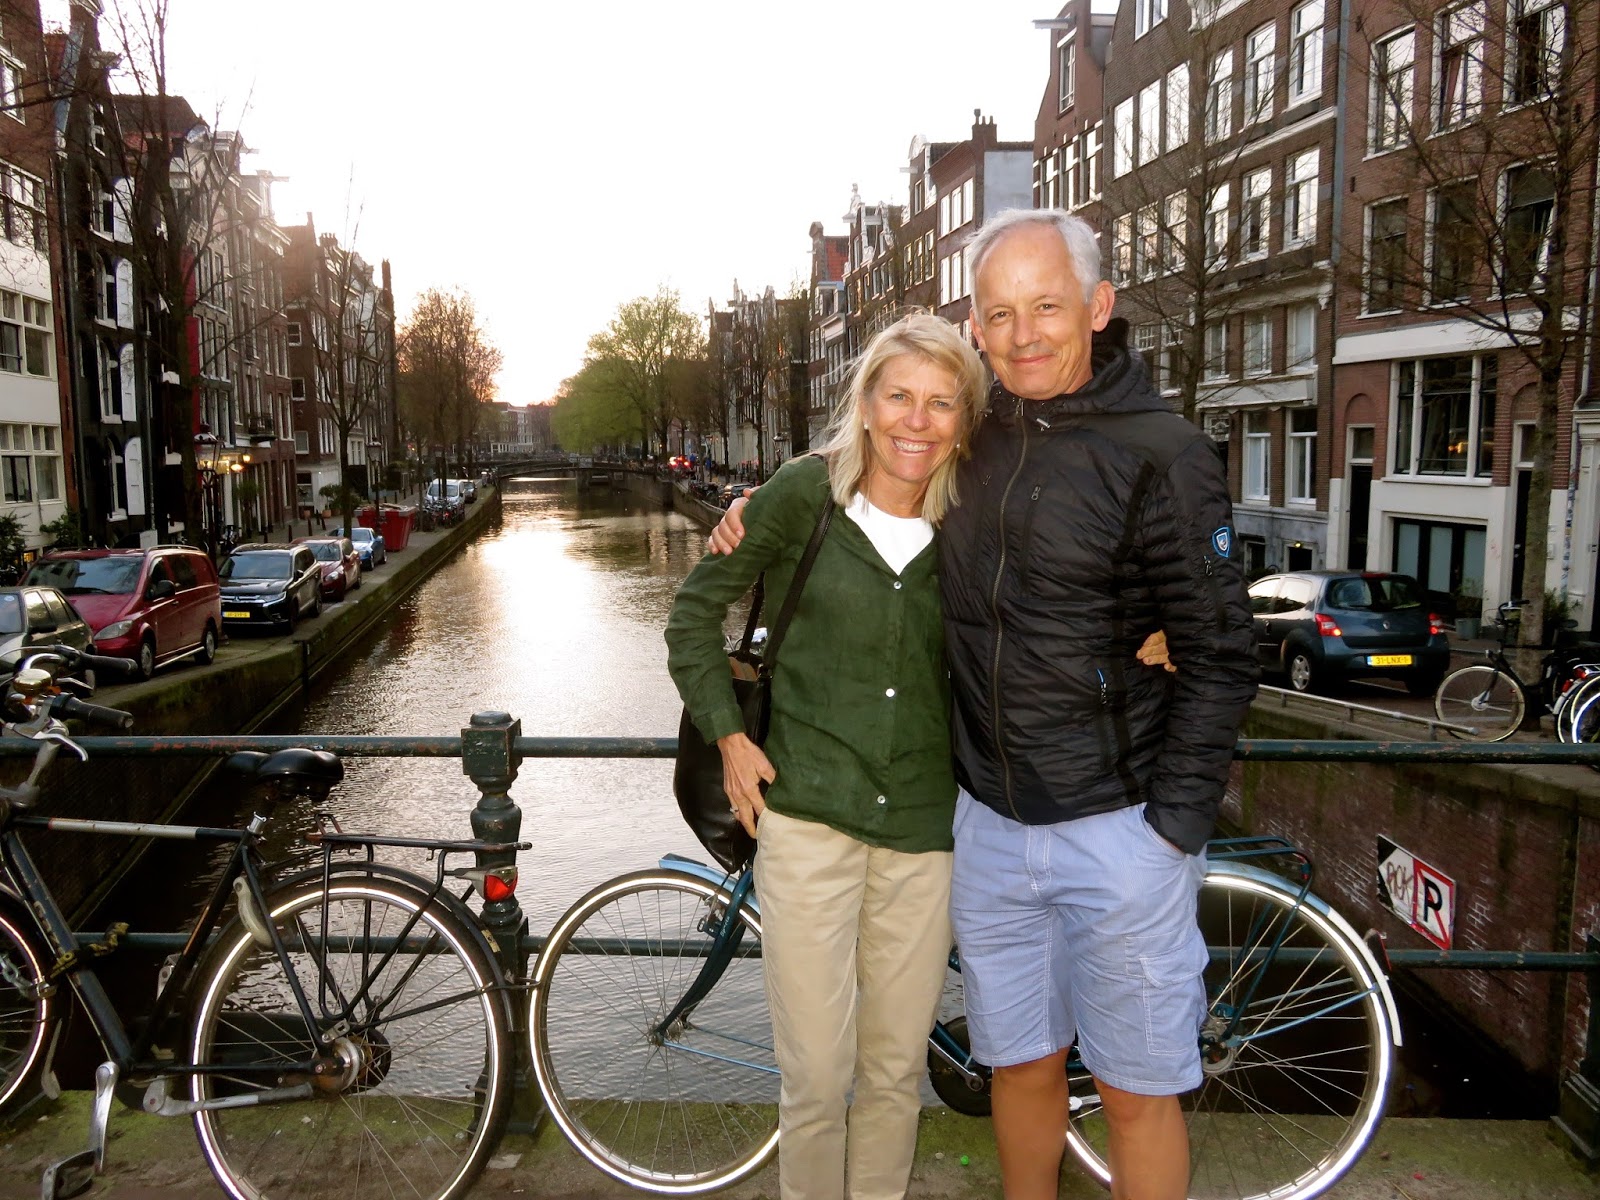 Parents in Amsterdam!